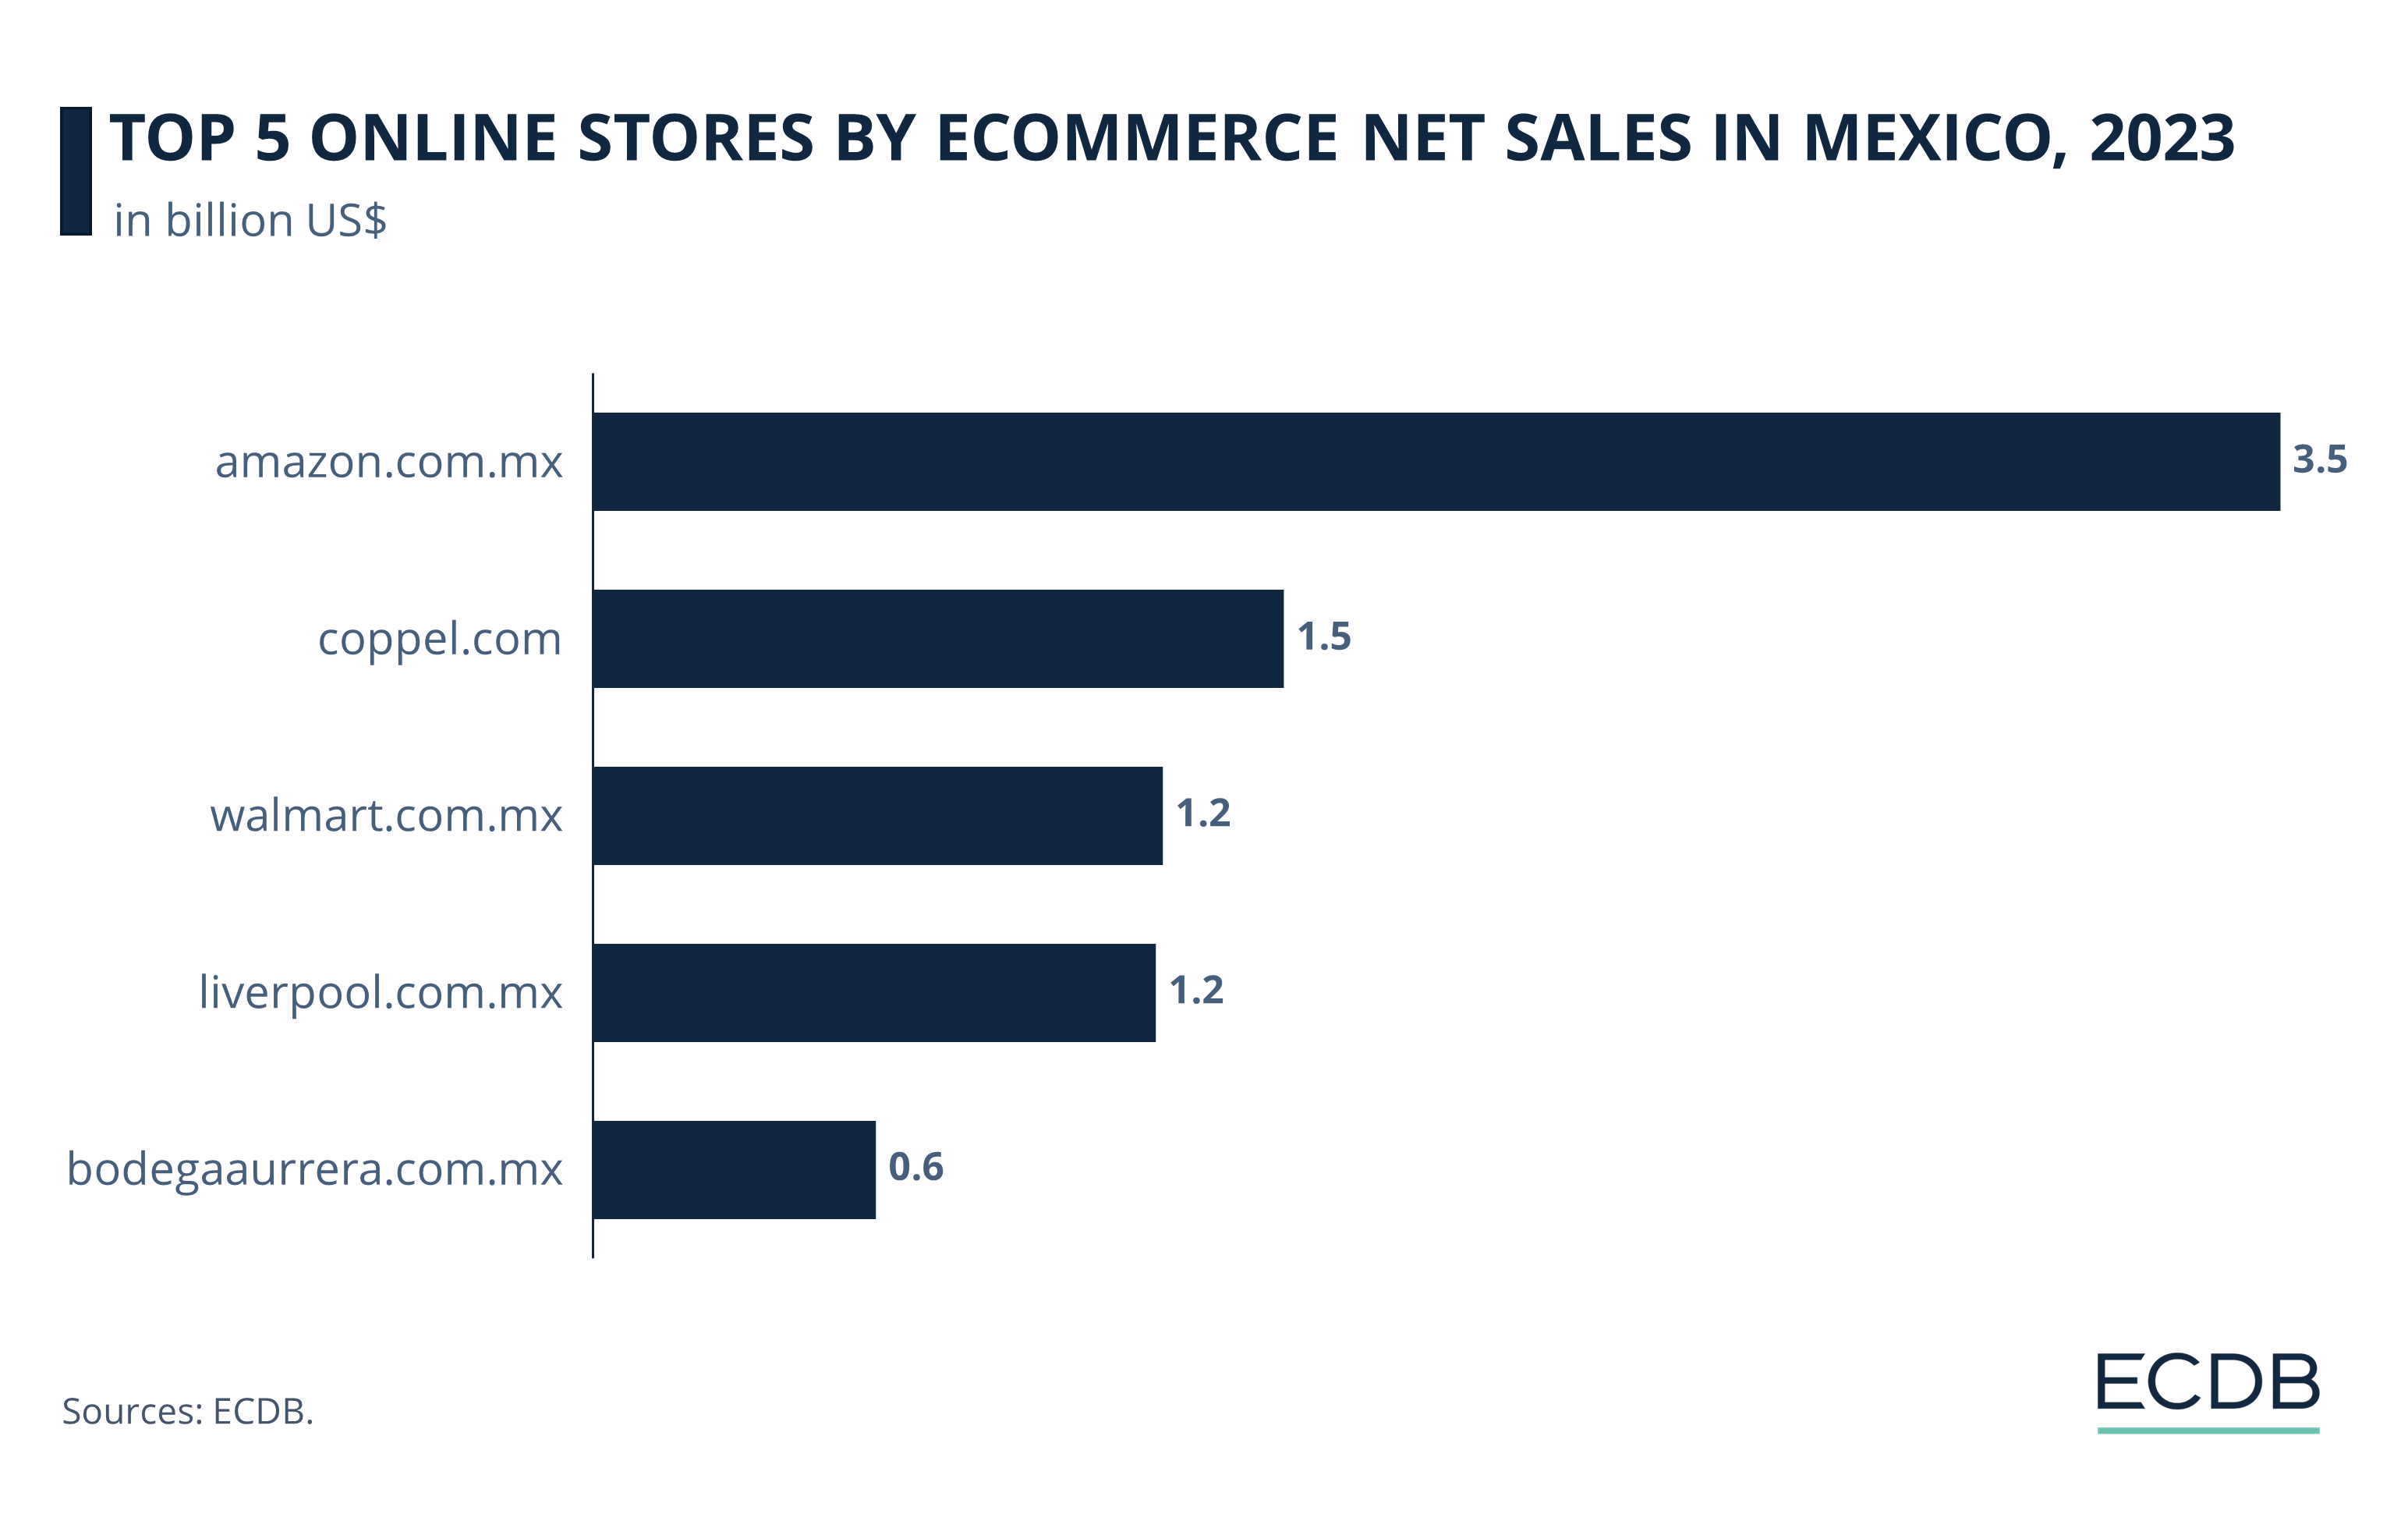 Top 5 Online Stores by eCommerce Net Sales in Mexico, 2023